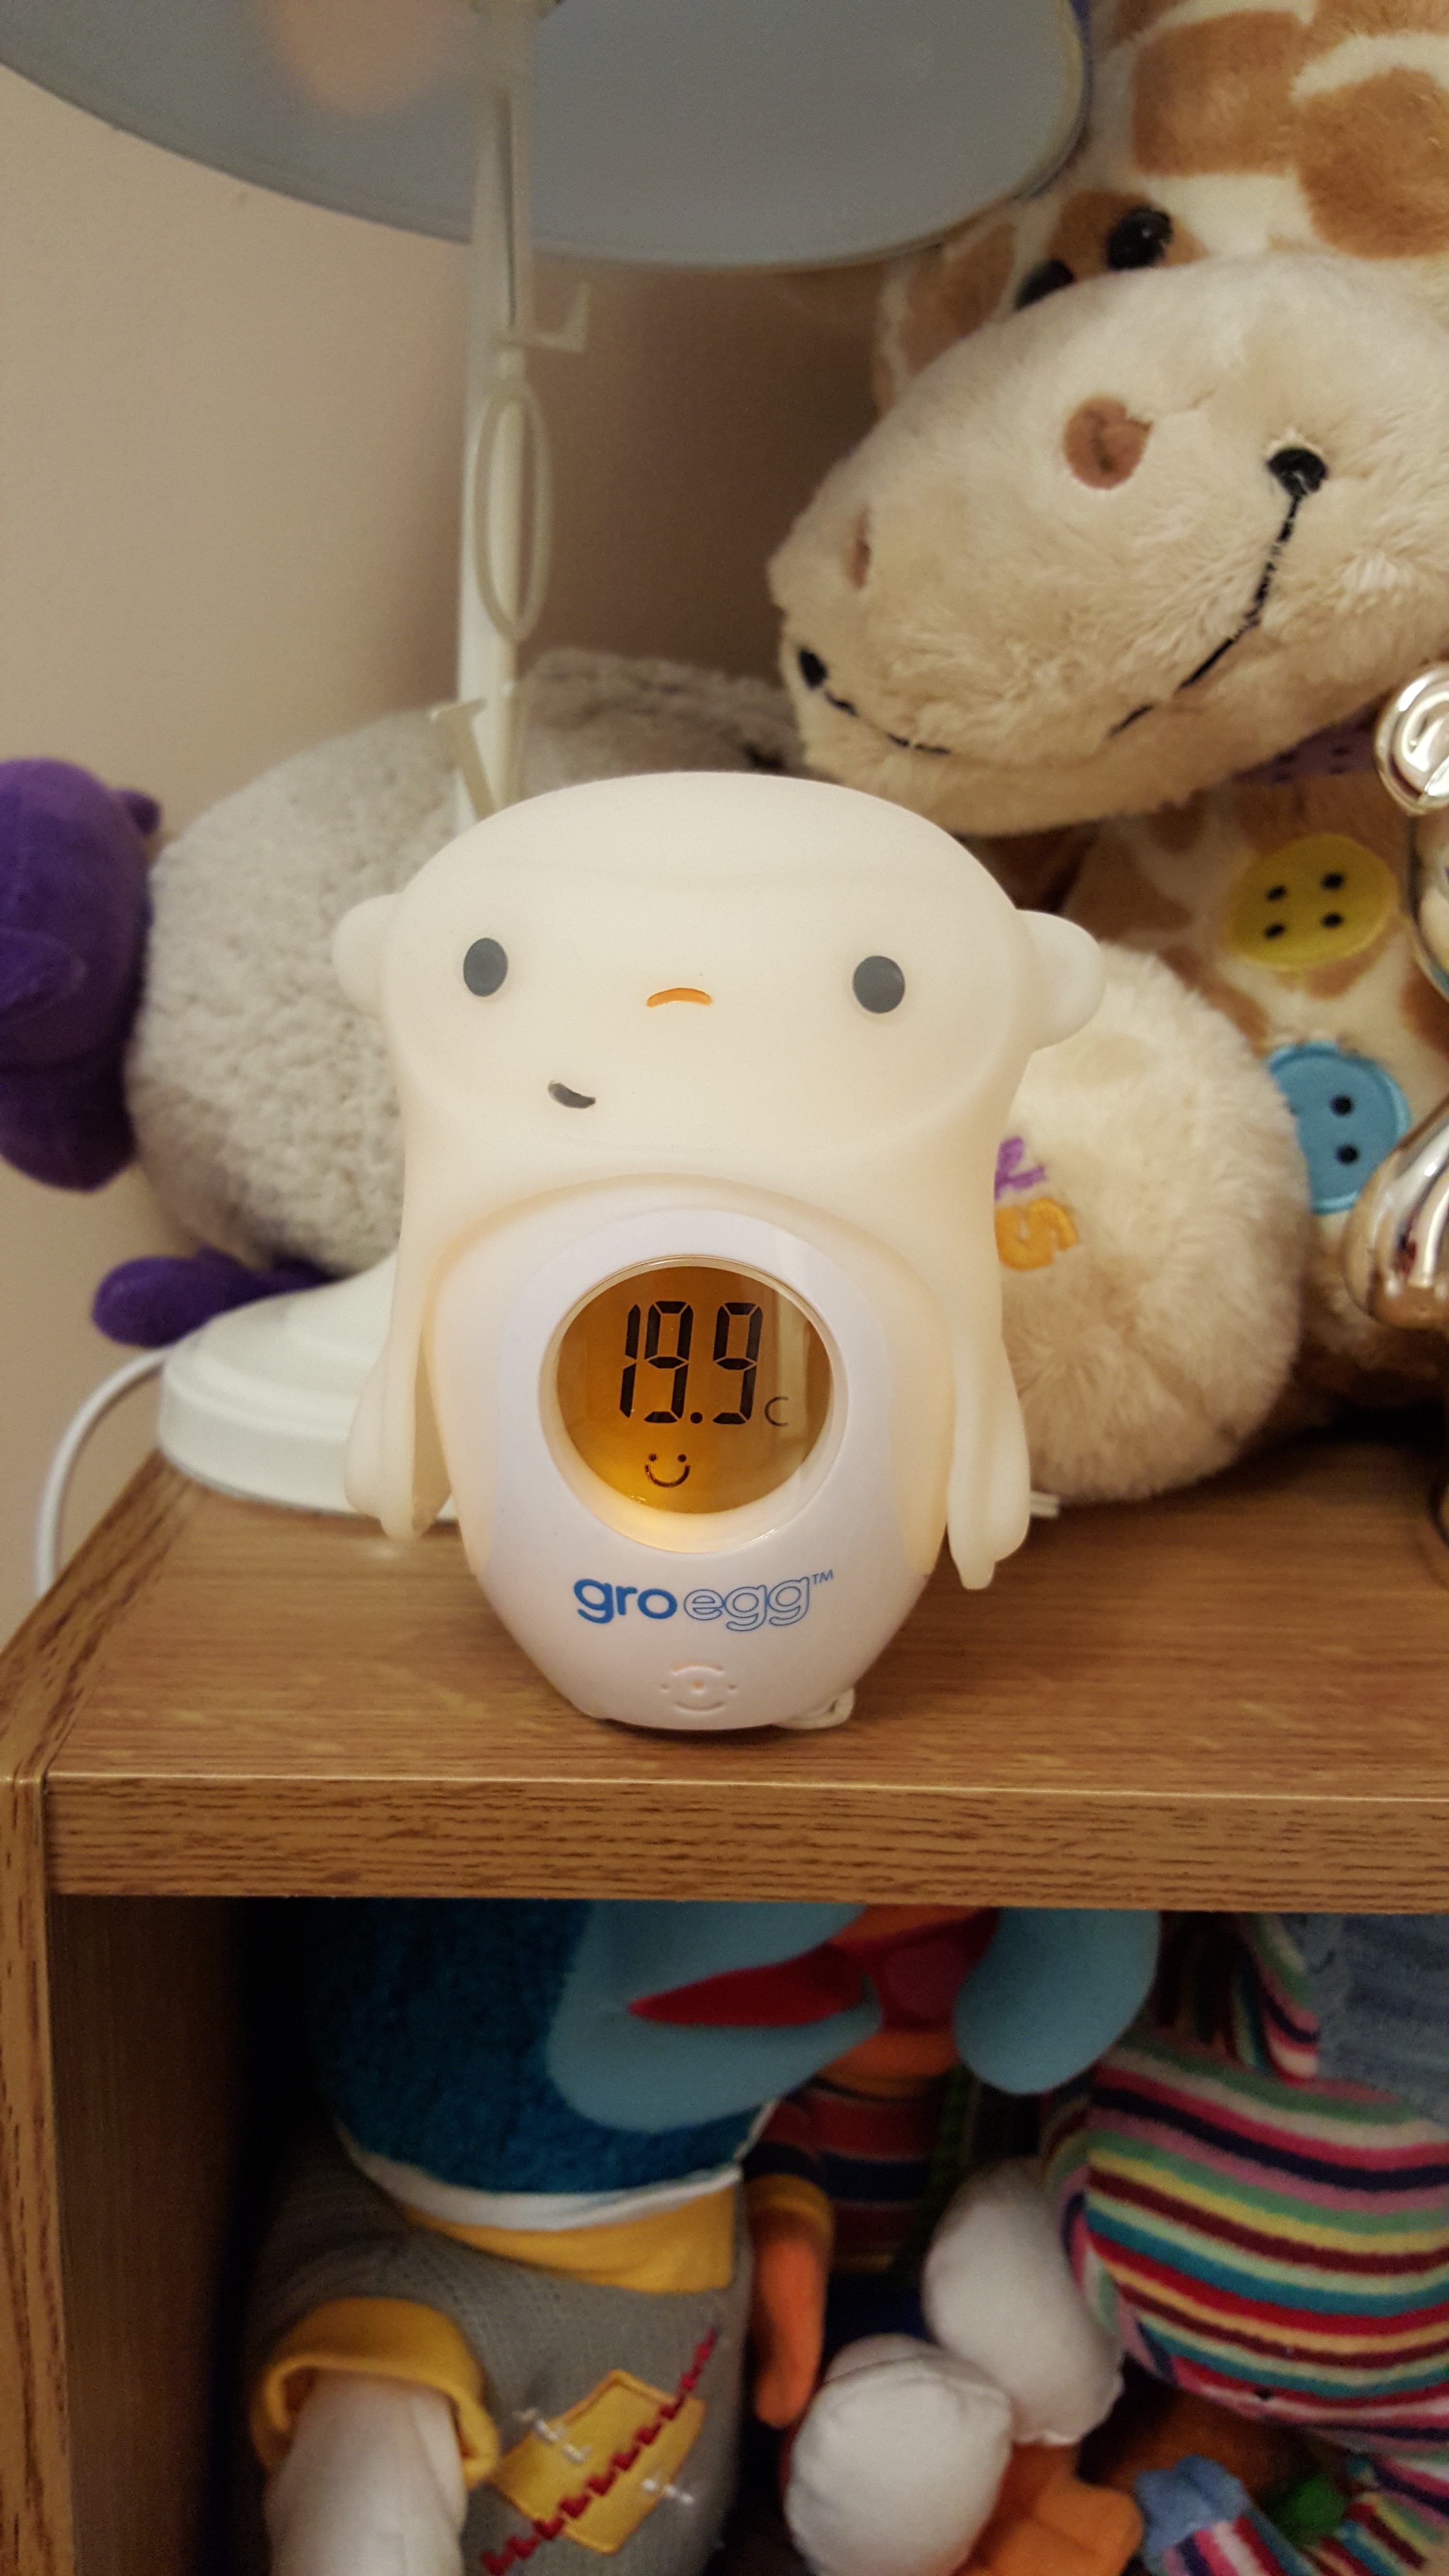 Glowing Baby Safety Pods: Grobag Egg Changes Color To Monitor Room  Temperature